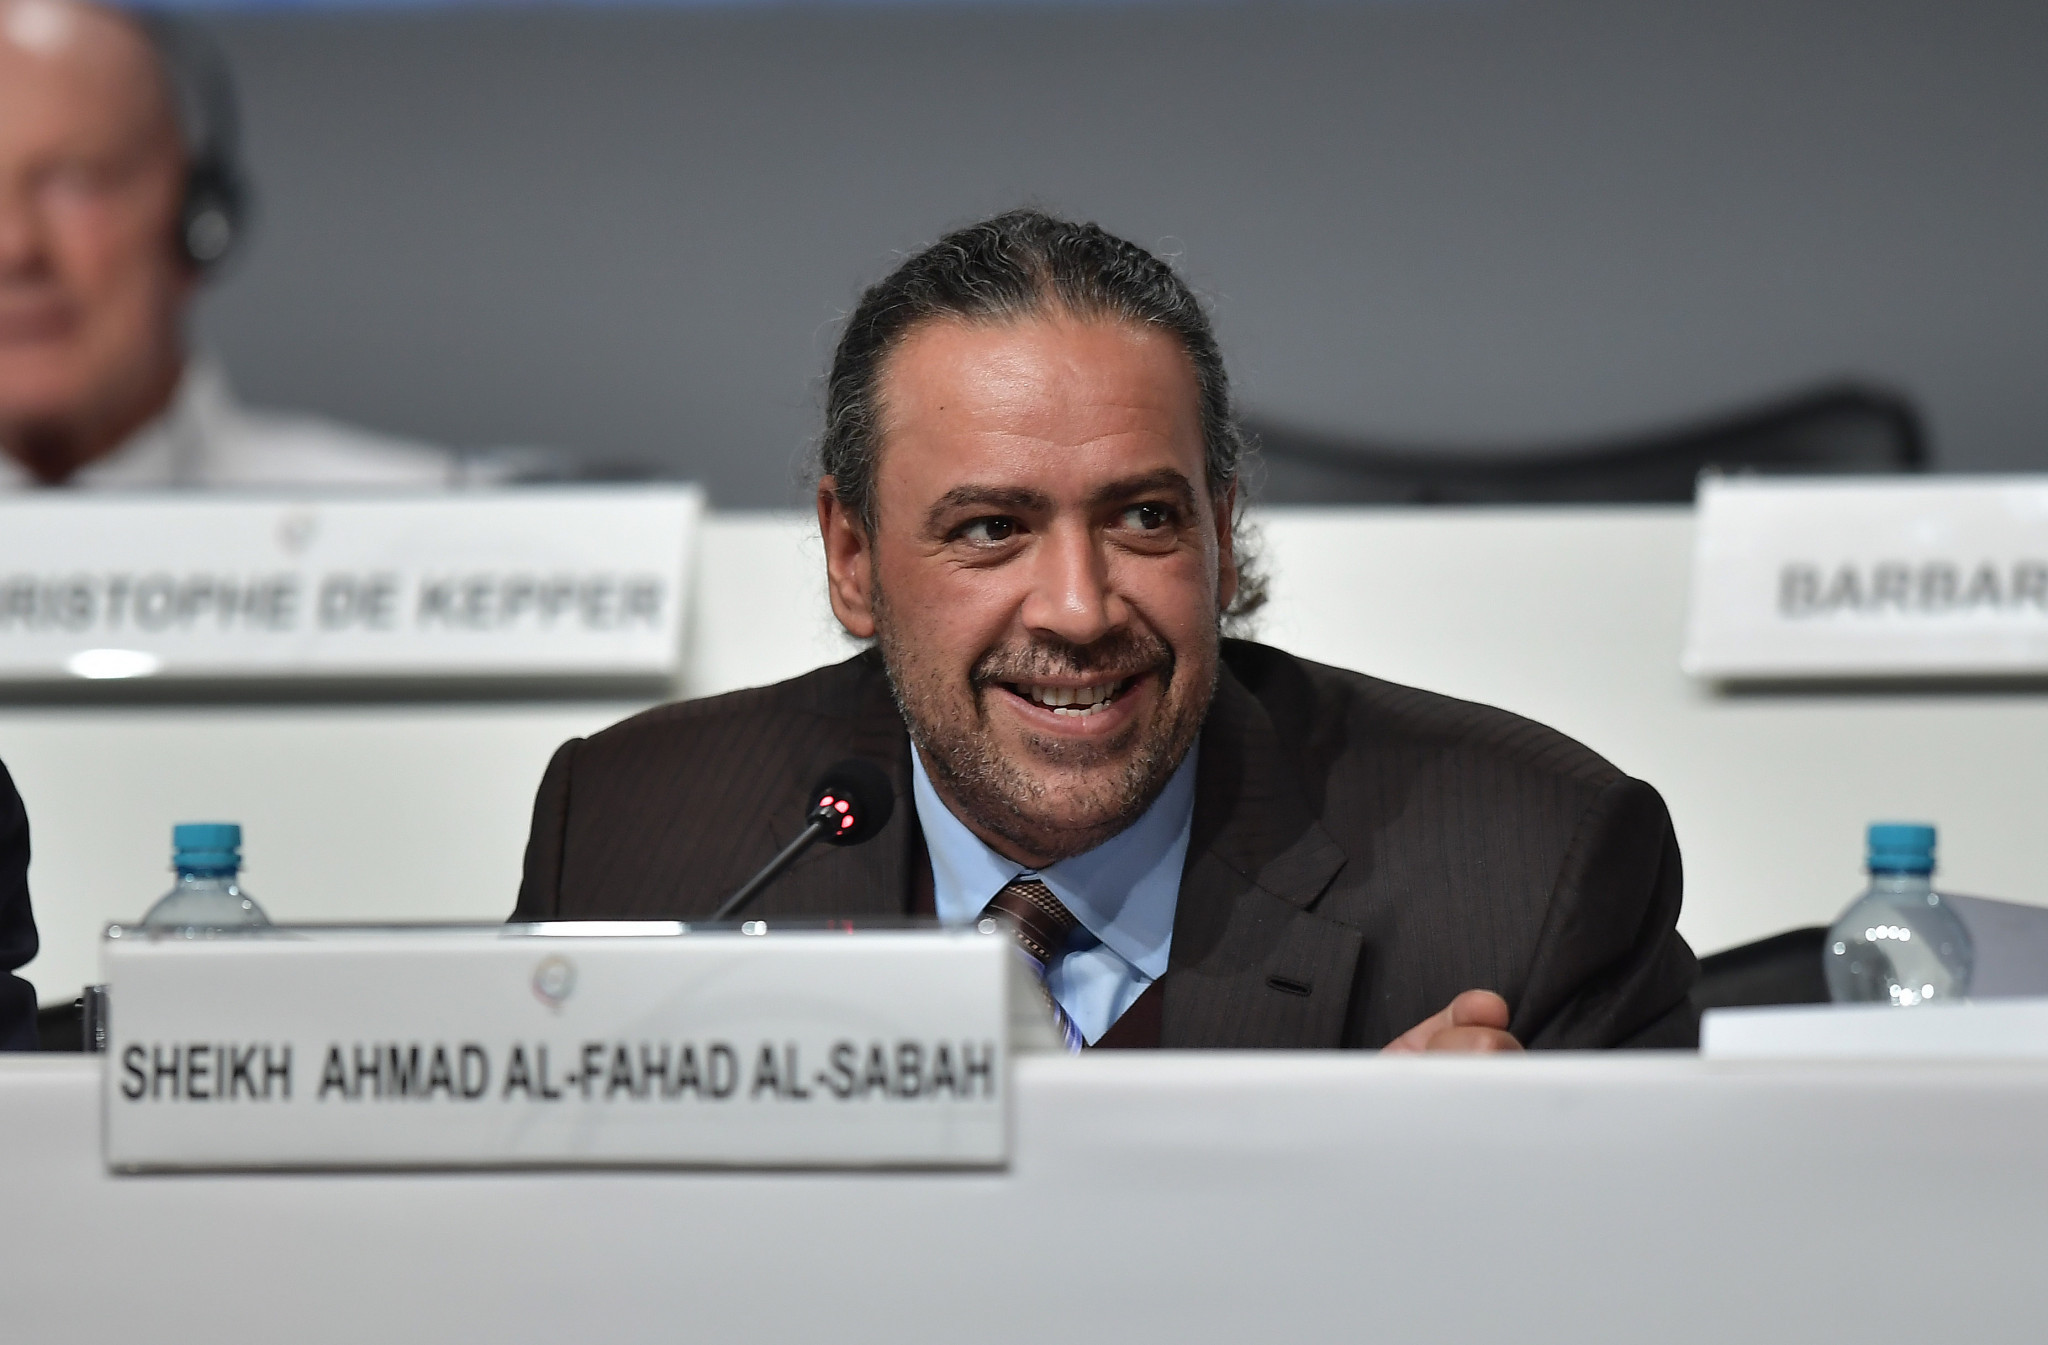 Sheikh Ahmad reflects on "very serious allegations" in ANOC New Year's message